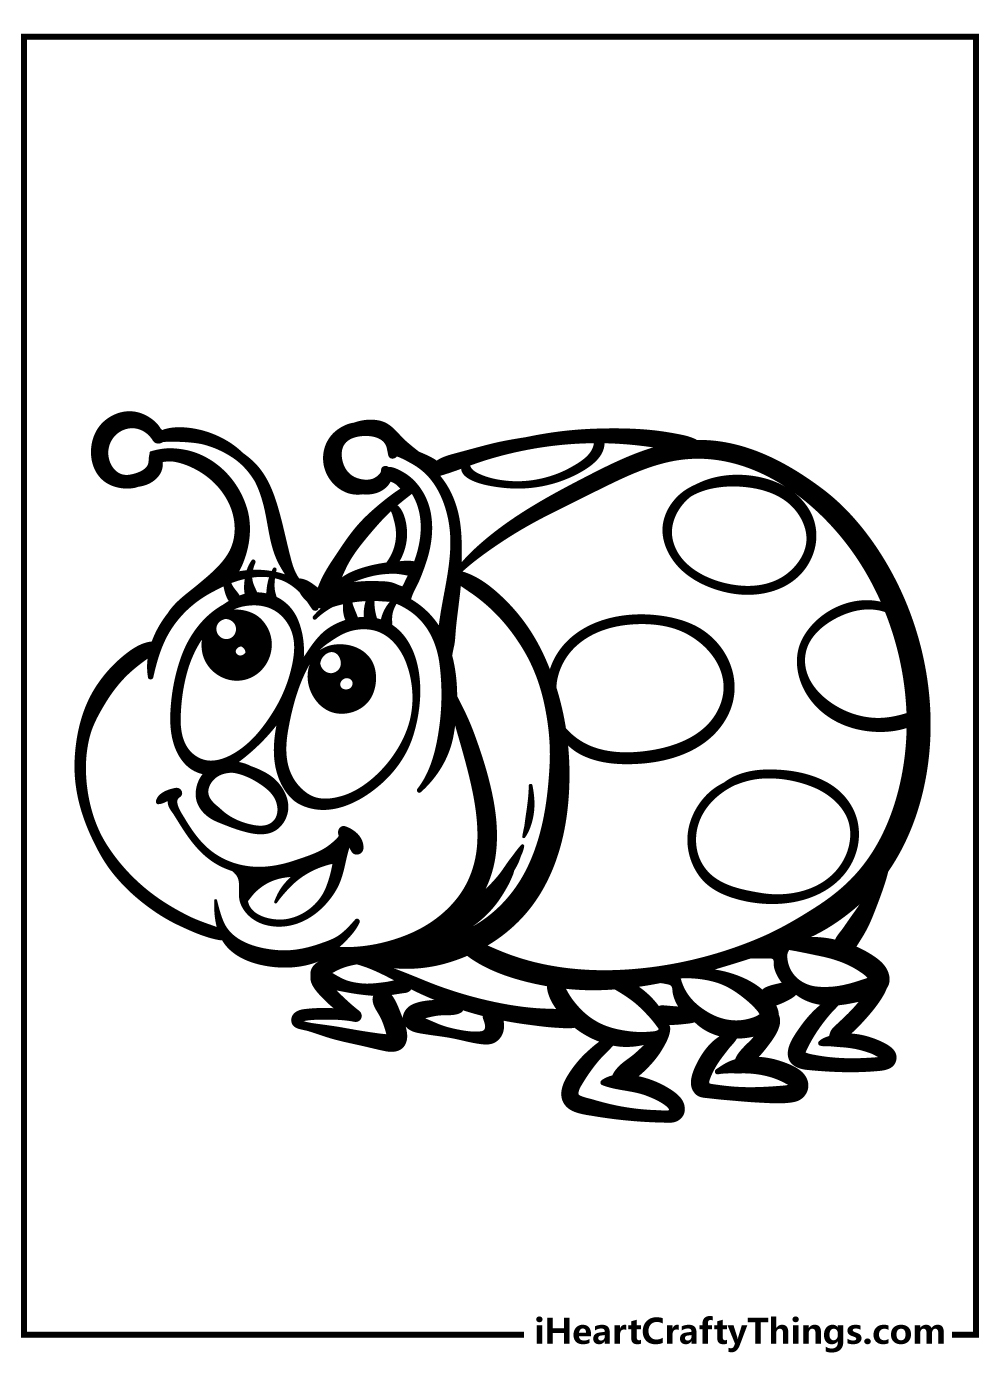 Ladybug Coloring Pages for adults free printable